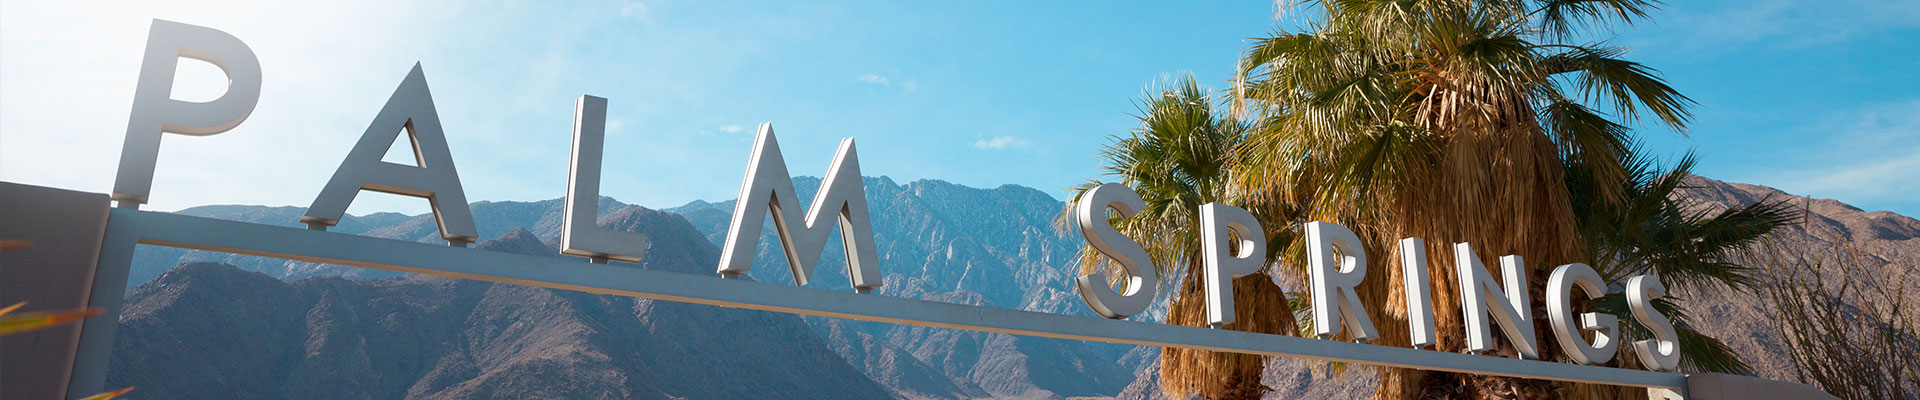 Fantasy RV Tours: 6 Day Palm Springs Valley Bash (06URRP-110920)